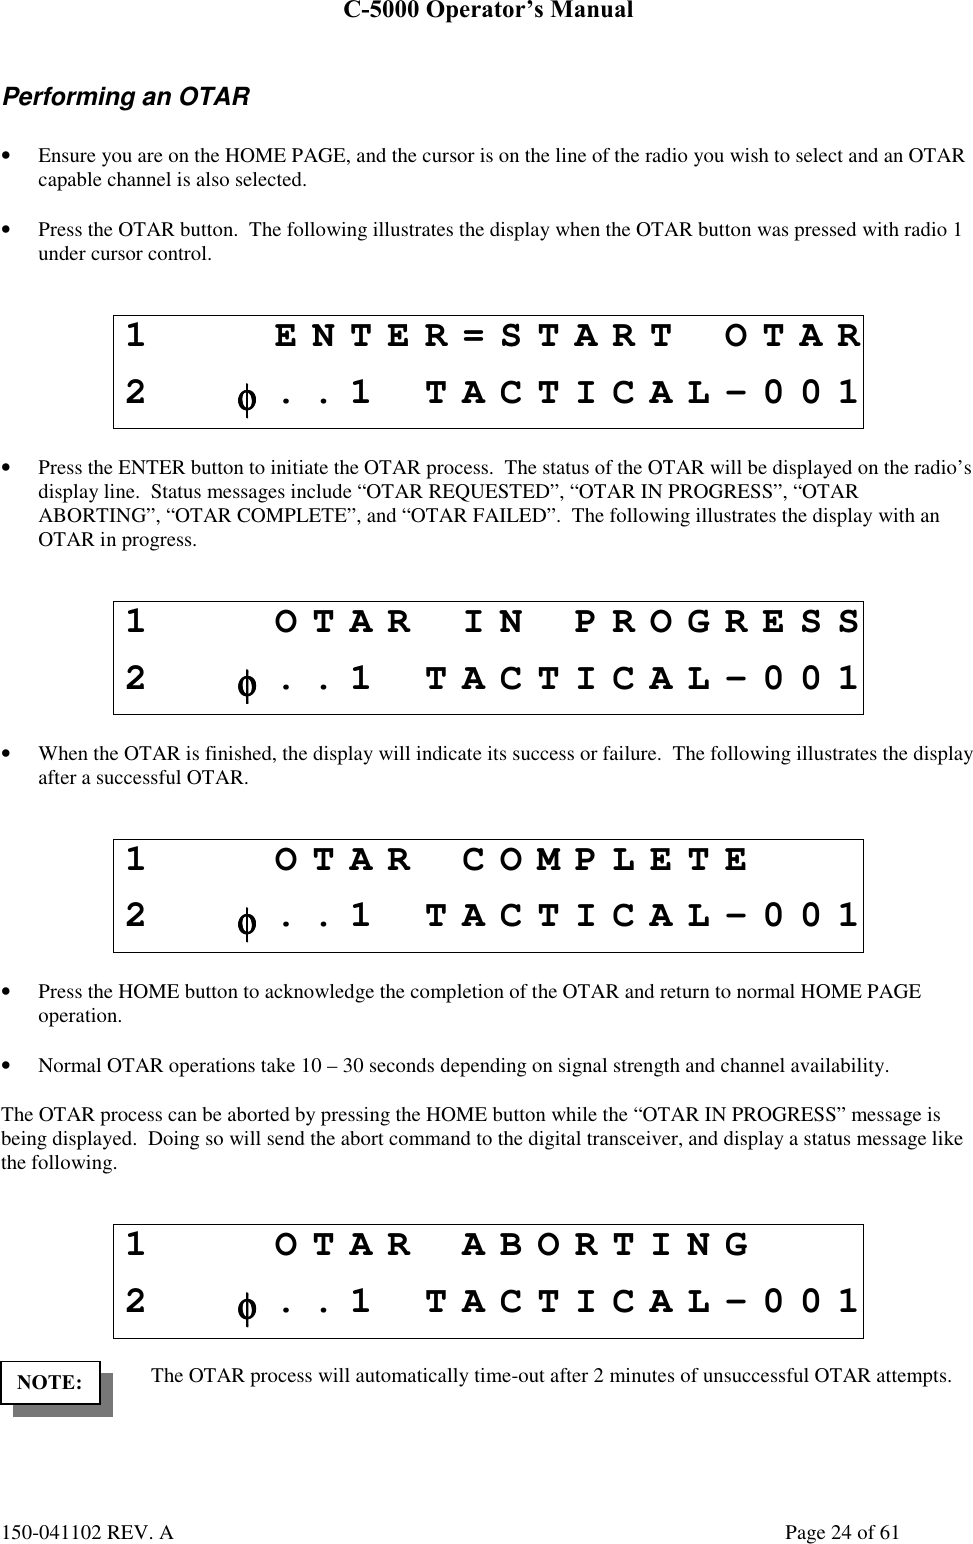 C-5000 Operator’s Manual150-041102 REV. A Page 24 of 61Performing an OTAR• Ensure you are on the HOME PAGE, and the cursor is on the line of the radio you wish to select and an OTARcapable channel is also selected.• Press the OTAR button.  The following illustrates the display when the OTAR button was pressed with radio 1under cursor control.1 ENTER=START OTAR2φφφφ..1 TACTICAL-001• Press the ENTER button to initiate the OTAR process.  The status of the OTAR will be displayed on the radio’sdisplay line.  Status messages include “OTAR REQUESTED”, “OTAR IN PROGRESS”, “OTARABORTING”, “OTAR COMPLETE”, and “OTAR FAILED”.  The following illustrates the display with anOTAR in progress.1 OTAR IN PROGRESS2φφφφ..1 TACTICAL-001• When the OTAR is finished, the display will indicate its success or failure.  The following illustrates the displayafter a successful OTAR.1 OTAR COMPLETE2φφφφ..1 TACTICAL-001• Press the HOME button to acknowledge the completion of the OTAR and return to normal HOME PAGEoperation.• Normal OTAR operations take 10 – 30 seconds depending on signal strength and channel availability.The OTAR process can be aborted by pressing the HOME button while the “OTAR IN PROGRESS” message isbeing displayed.  Doing so will send the abort command to the digital transceiver, and display a status message likethe following.1 OTAR ABORTING2φφφφ..1 TACTICAL-001The OTAR process will automatically time-out after 2 minutes of unsuccessful OTAR attempts.NOTE: